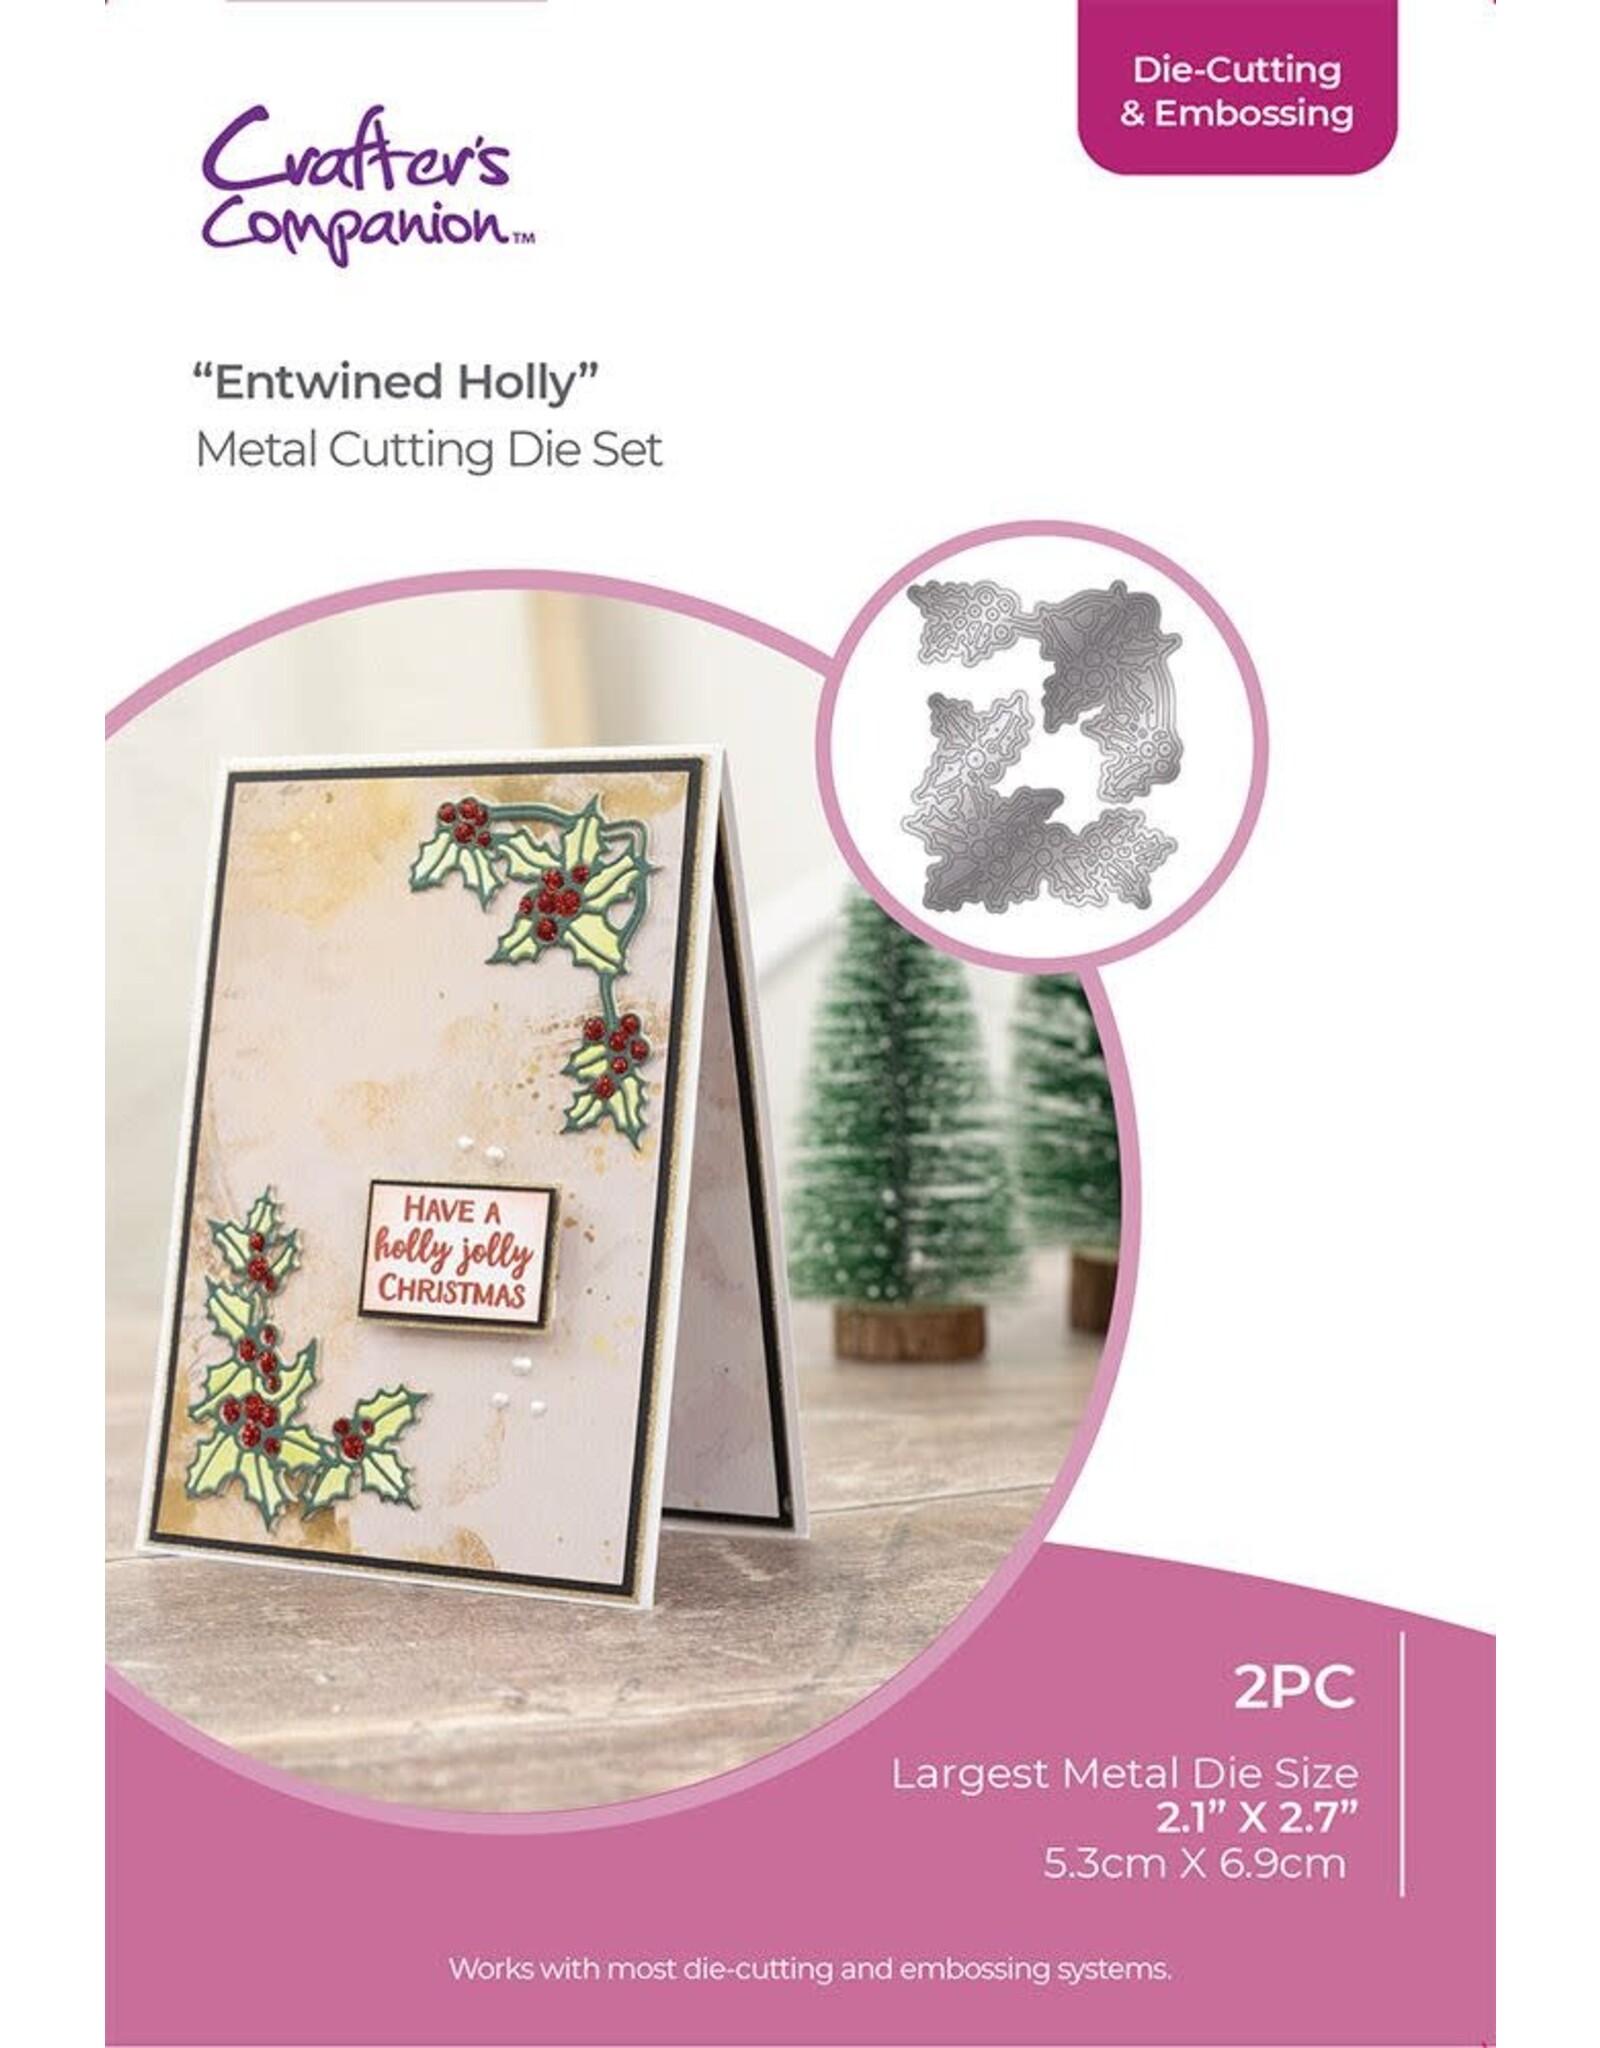 CRAFTERS COMPANION CRAFTER'S COMPANION ENTWINED HOLLY DIE-CUTTING & EMBOSSING DIE SET